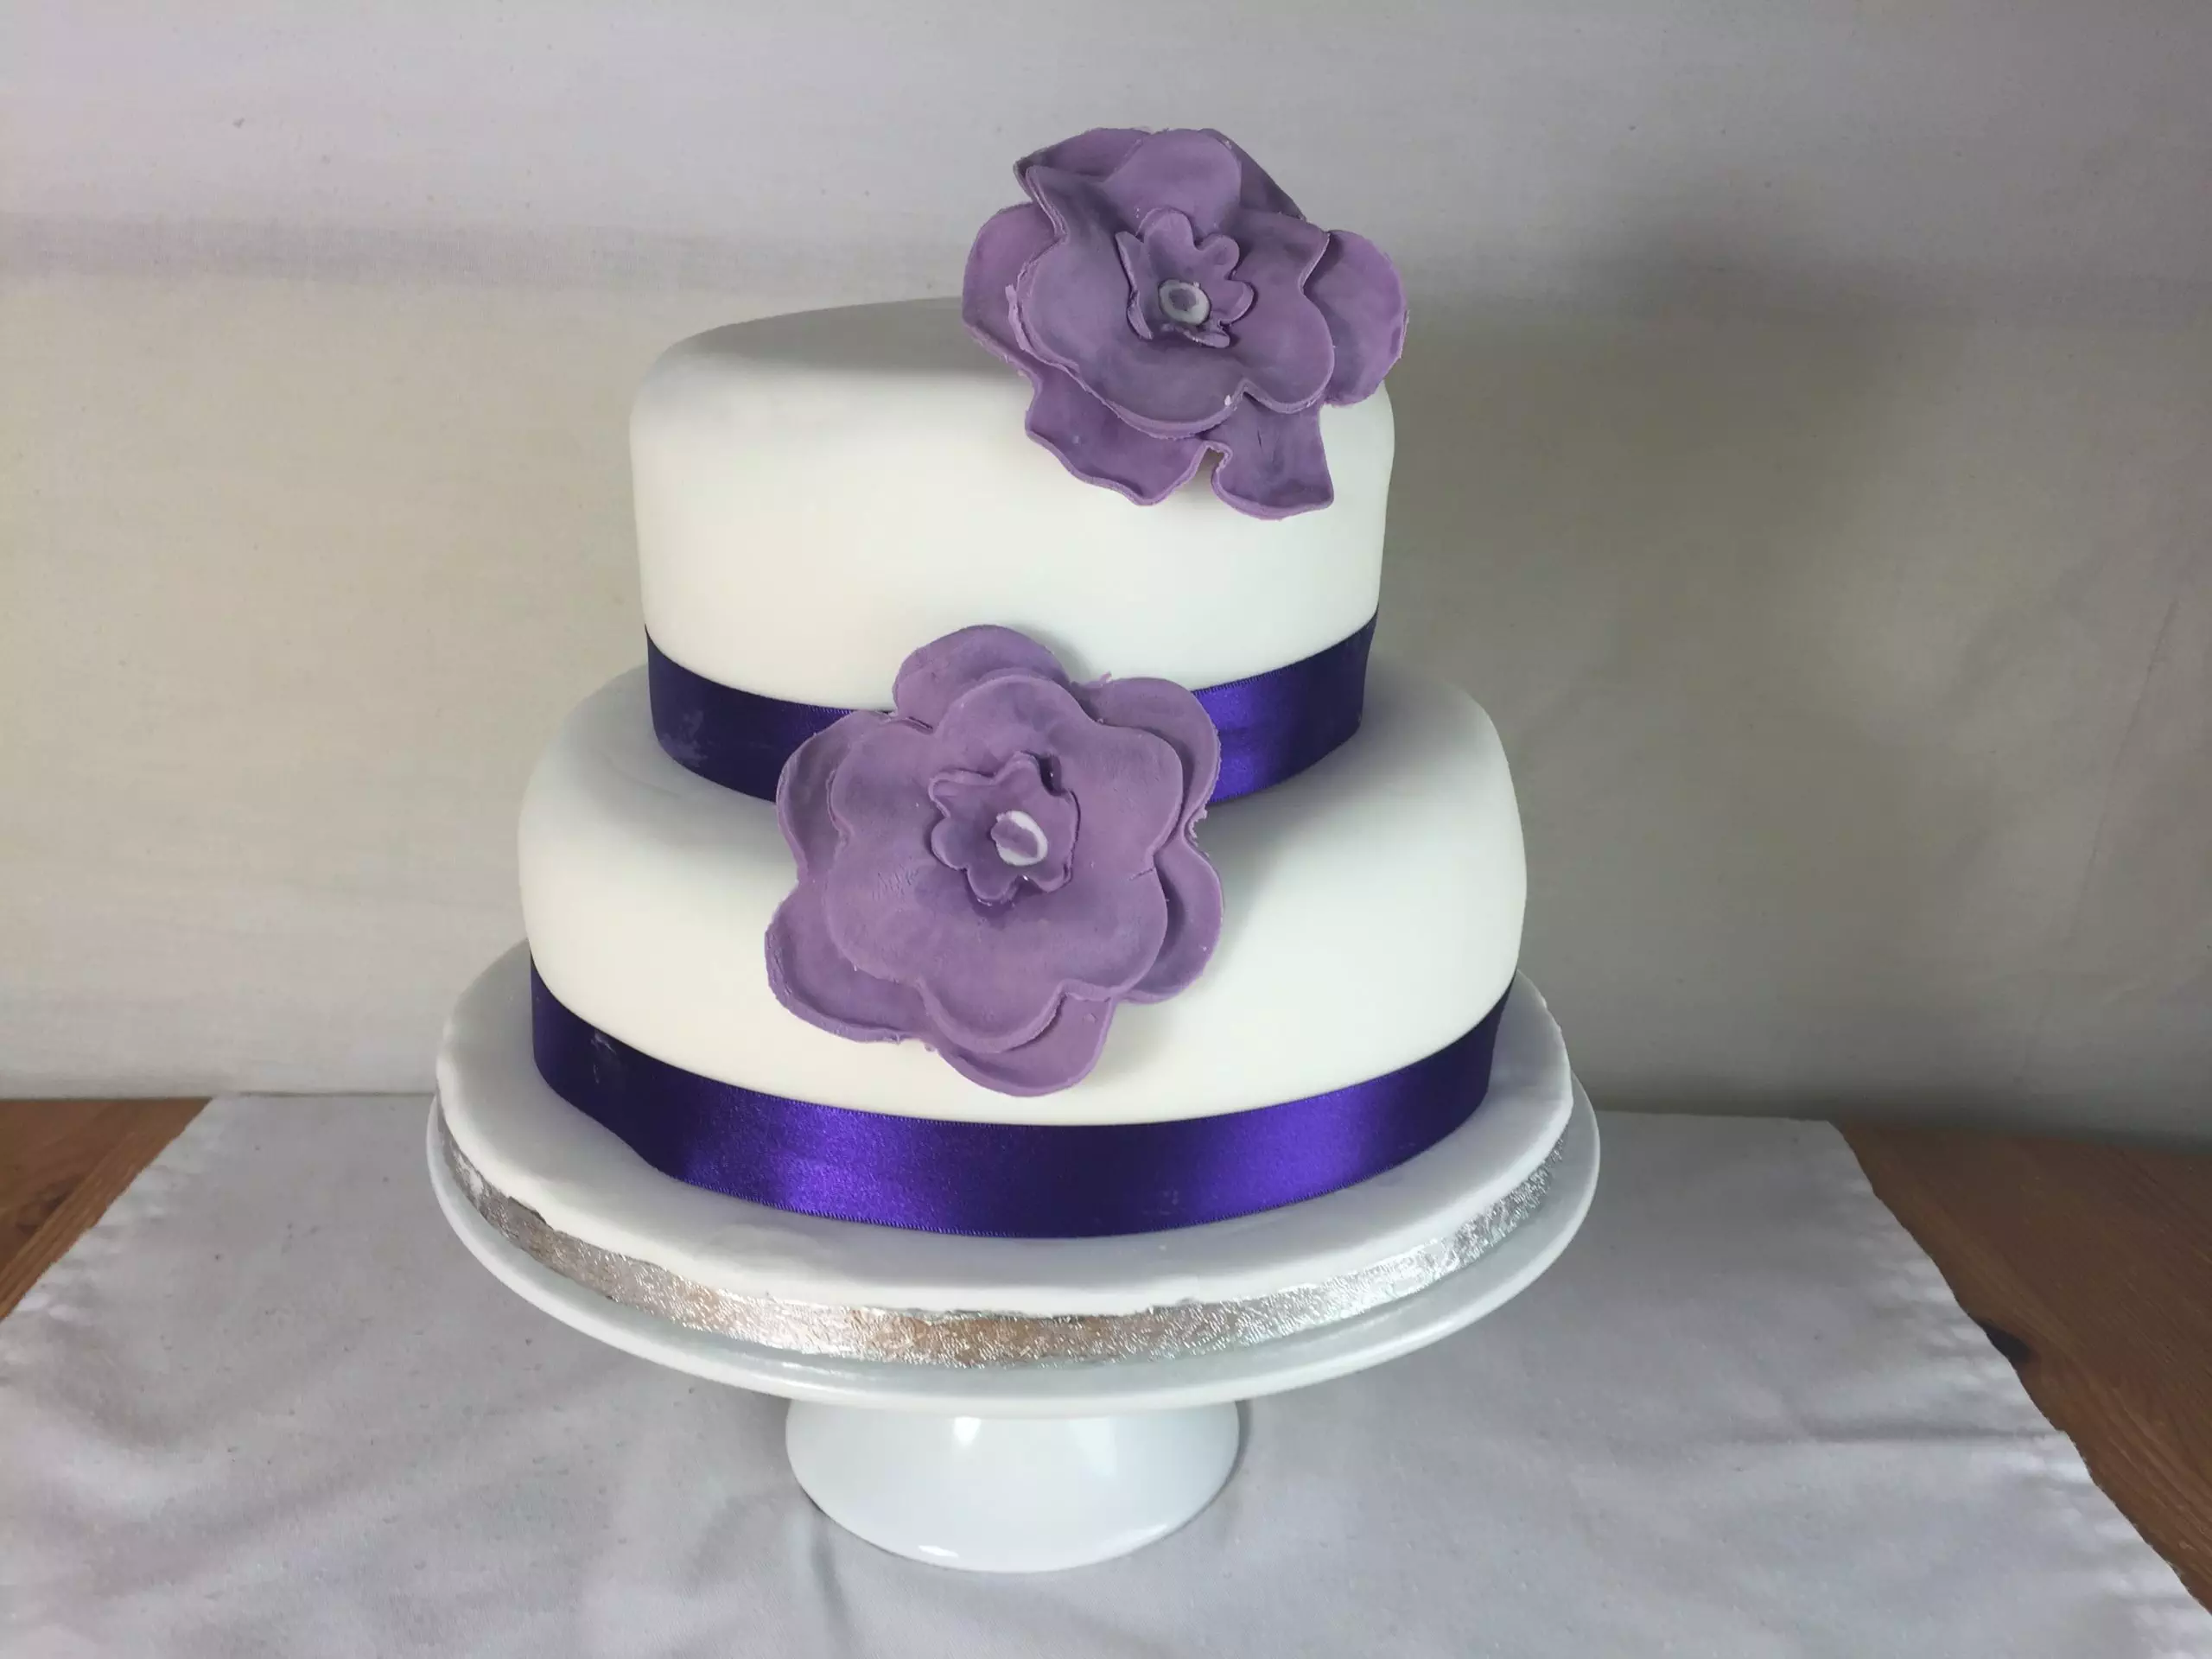 My first attempt at a two tier cake